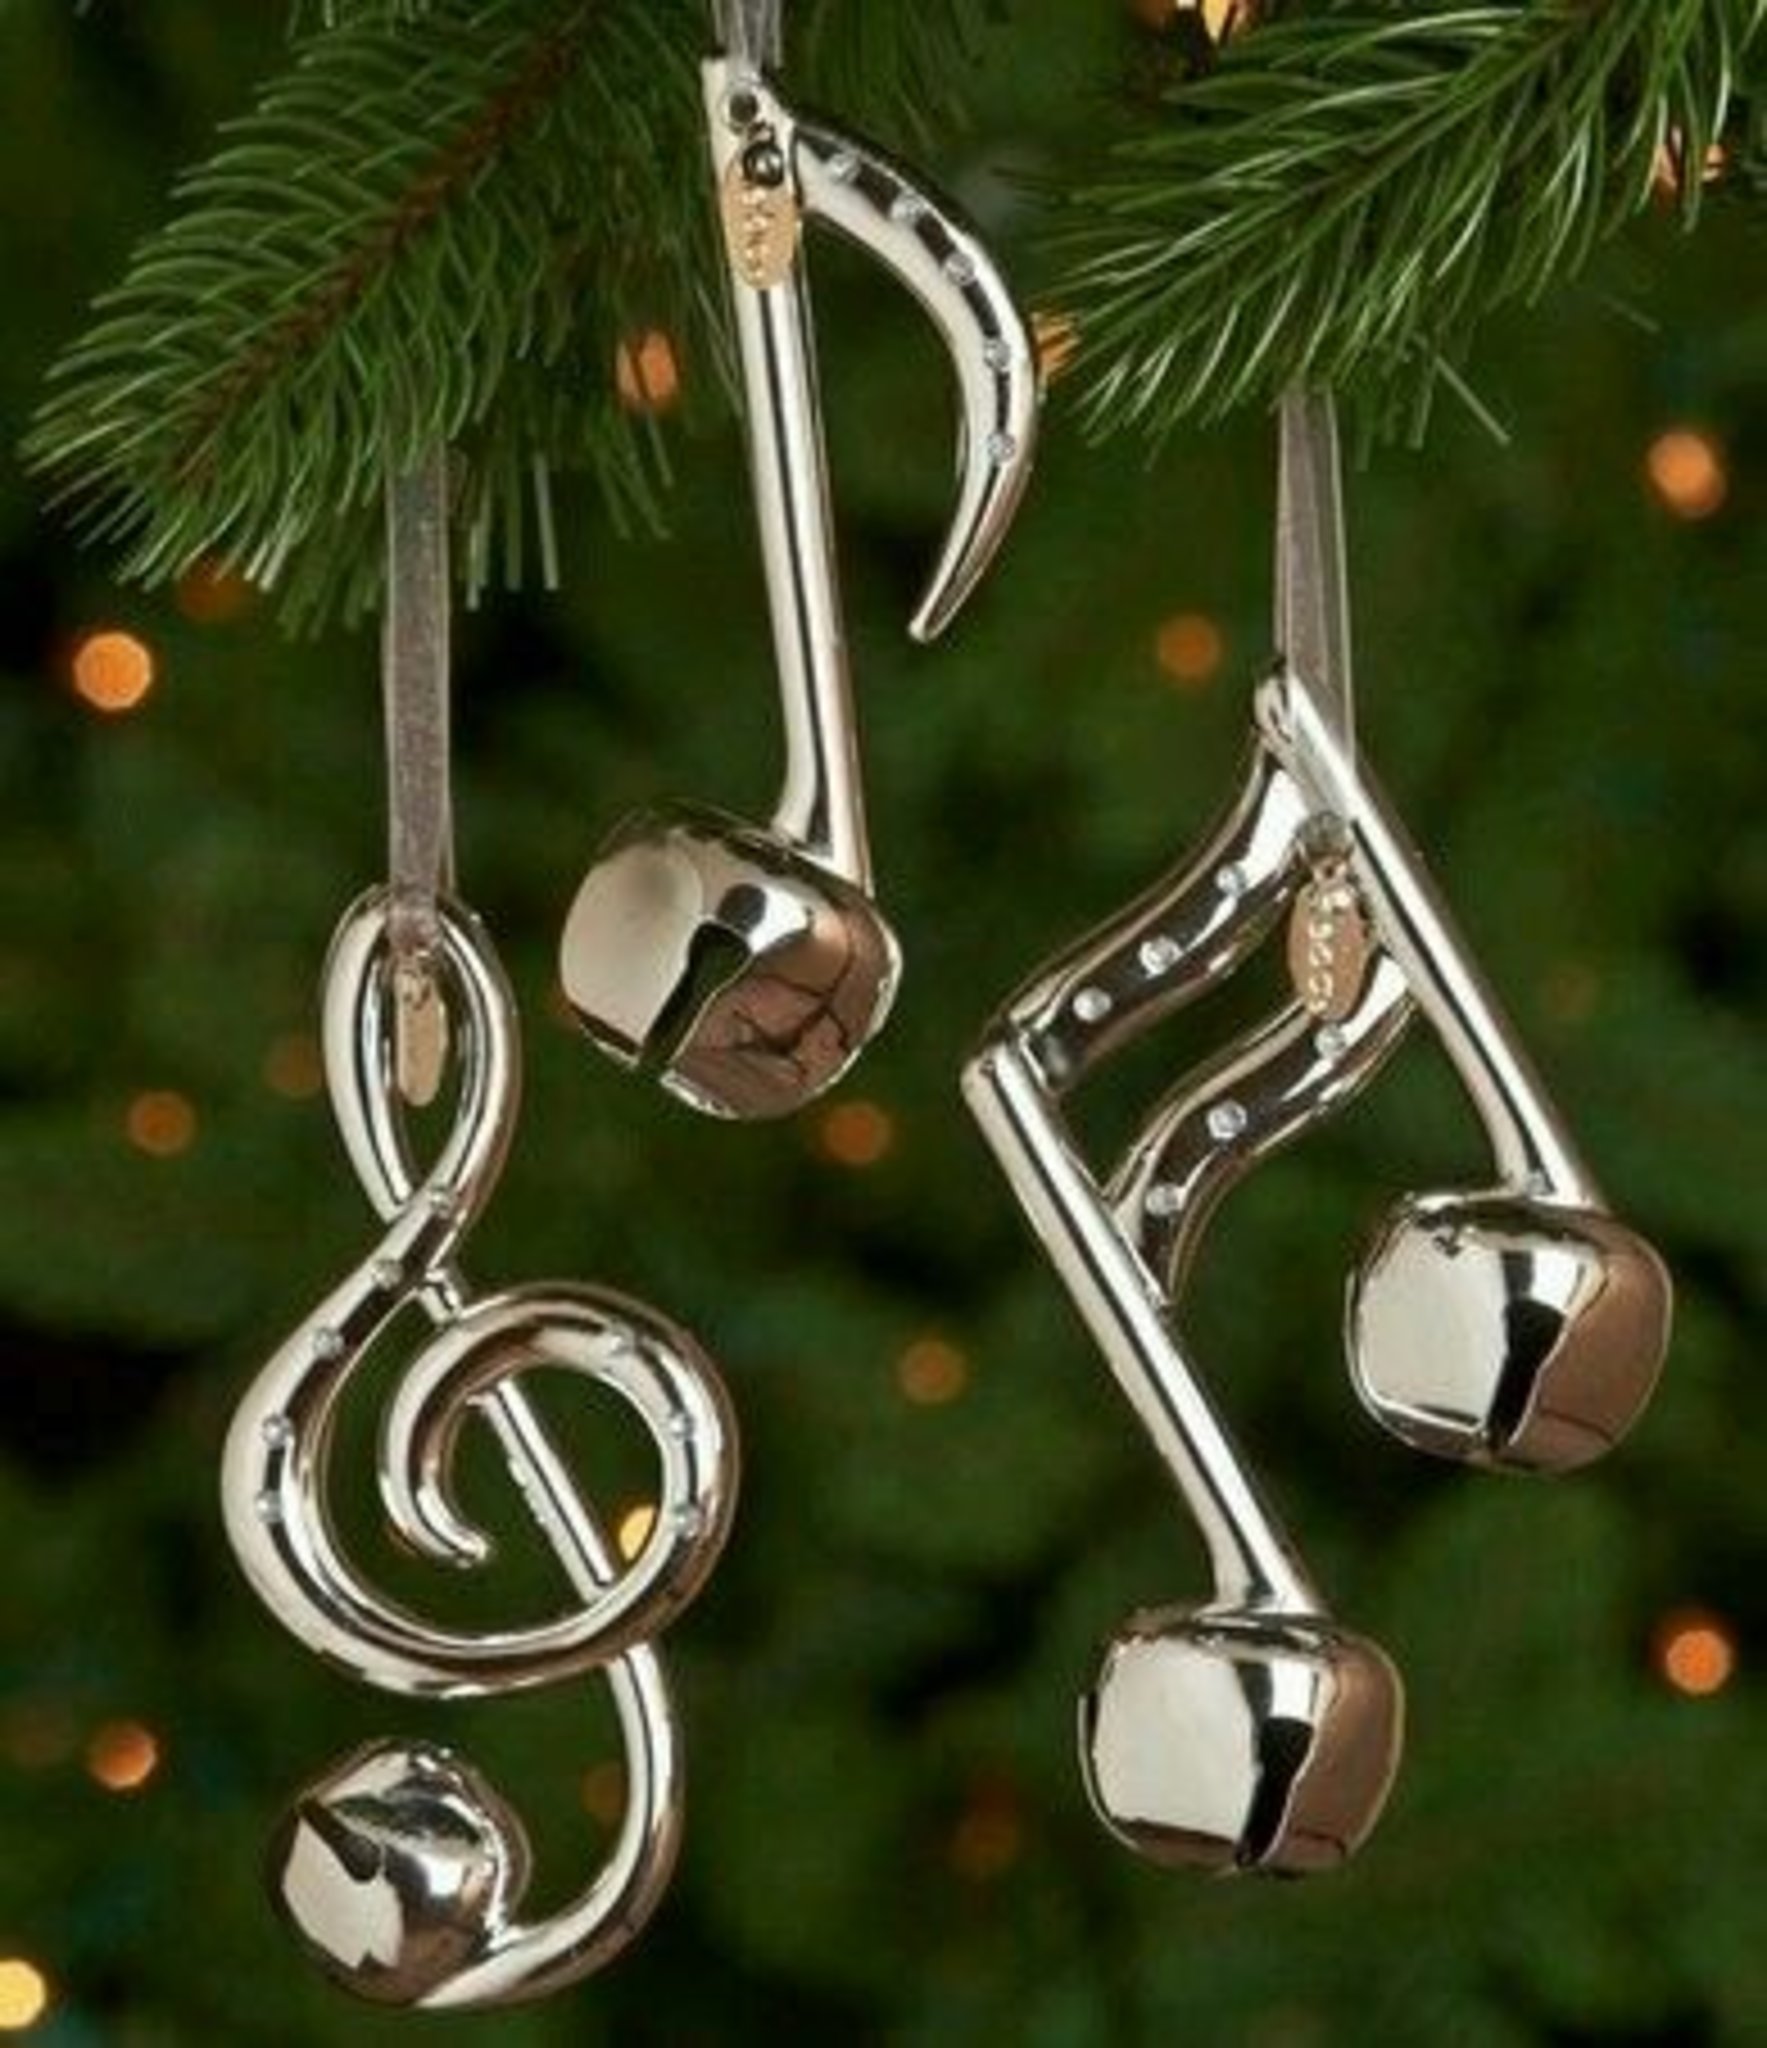 Musical Decoration in Christmas Style